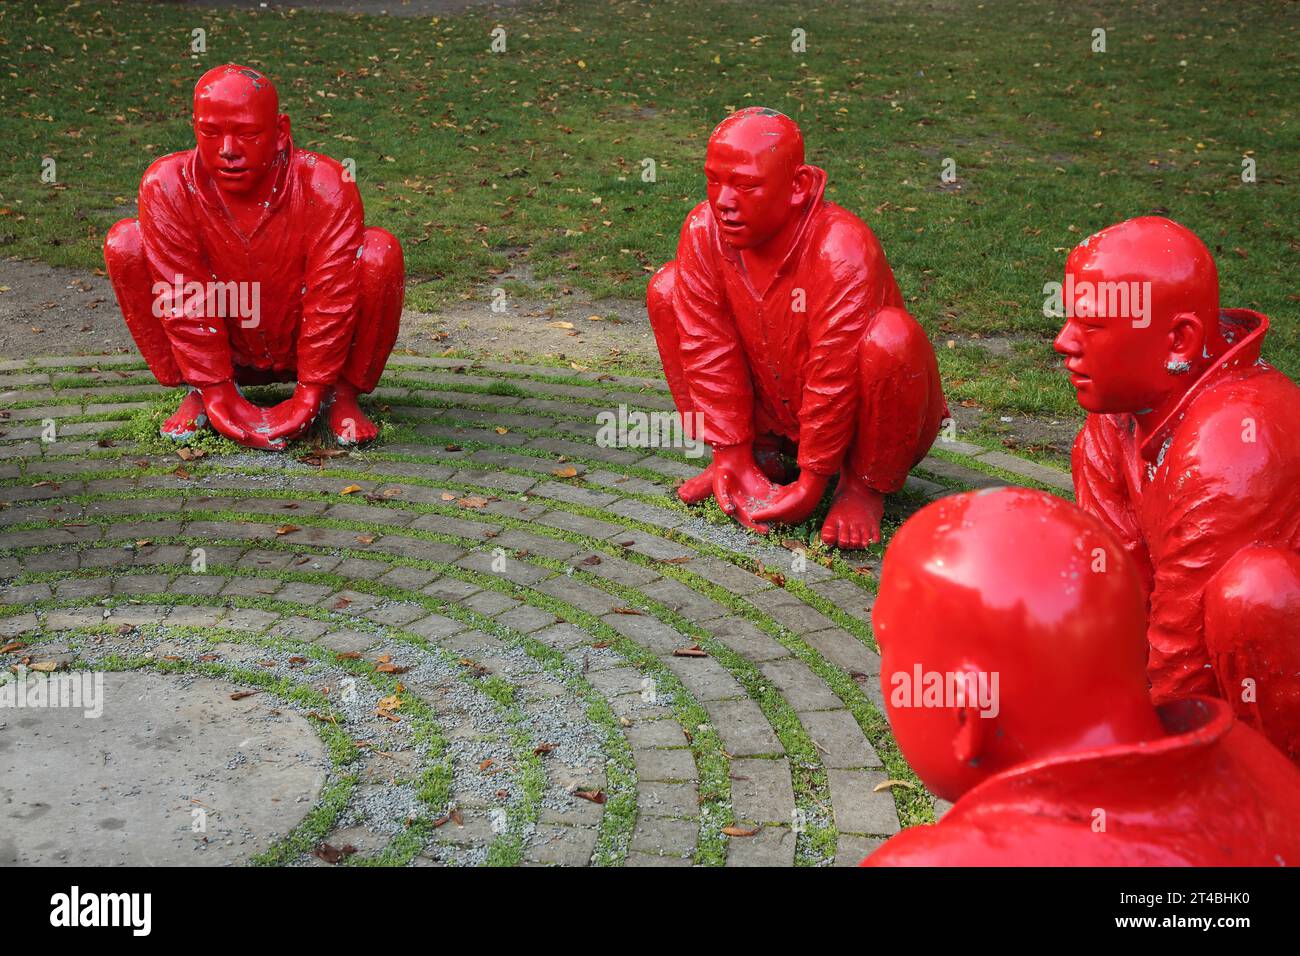 Sculpture Meeting by Wang Shugang 2013, sculpture group, red, figures, circle, sitting, men, Chinese, Chinese monks, kneeling, heads, back Stock Photo